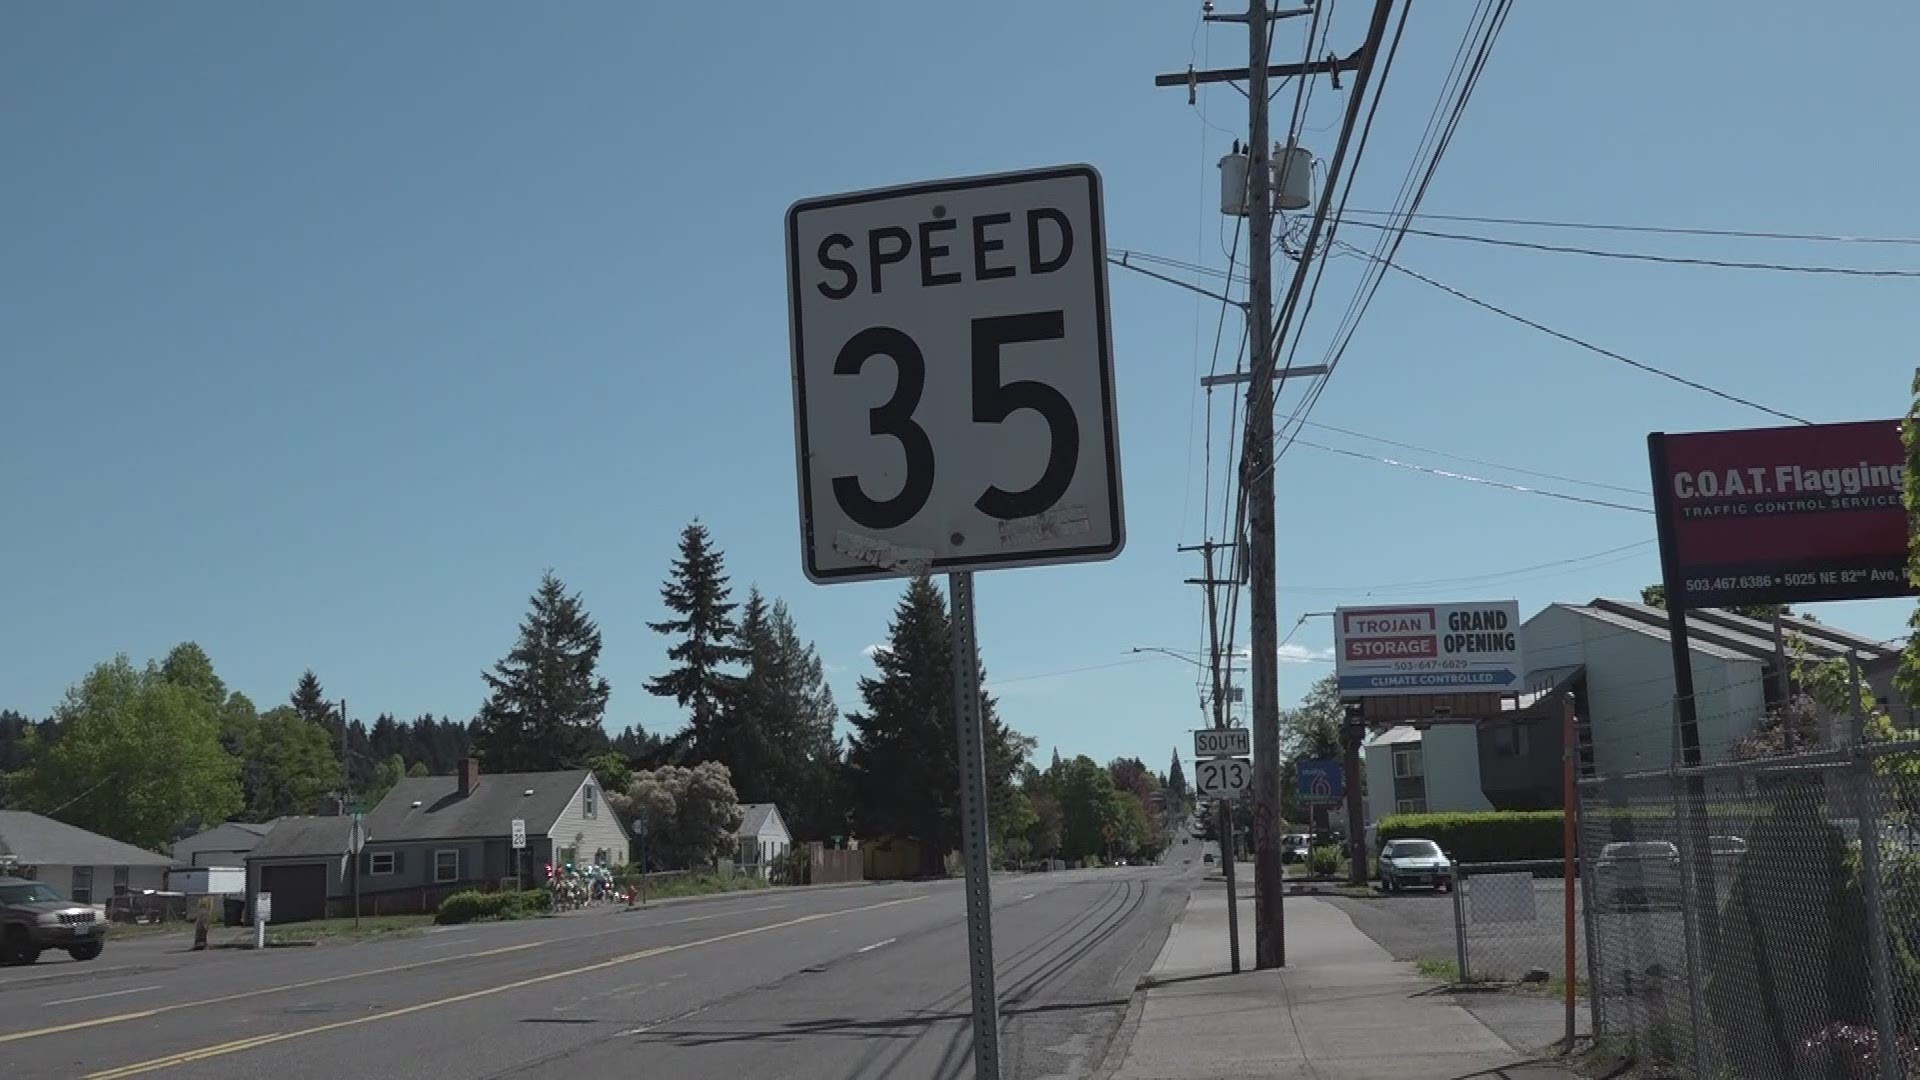 Two pedestrians were killed within two blocks of one another along 82nd Ave.  The crashes occurred just 14 days apart. A group wants ODOT to reduce the speed now